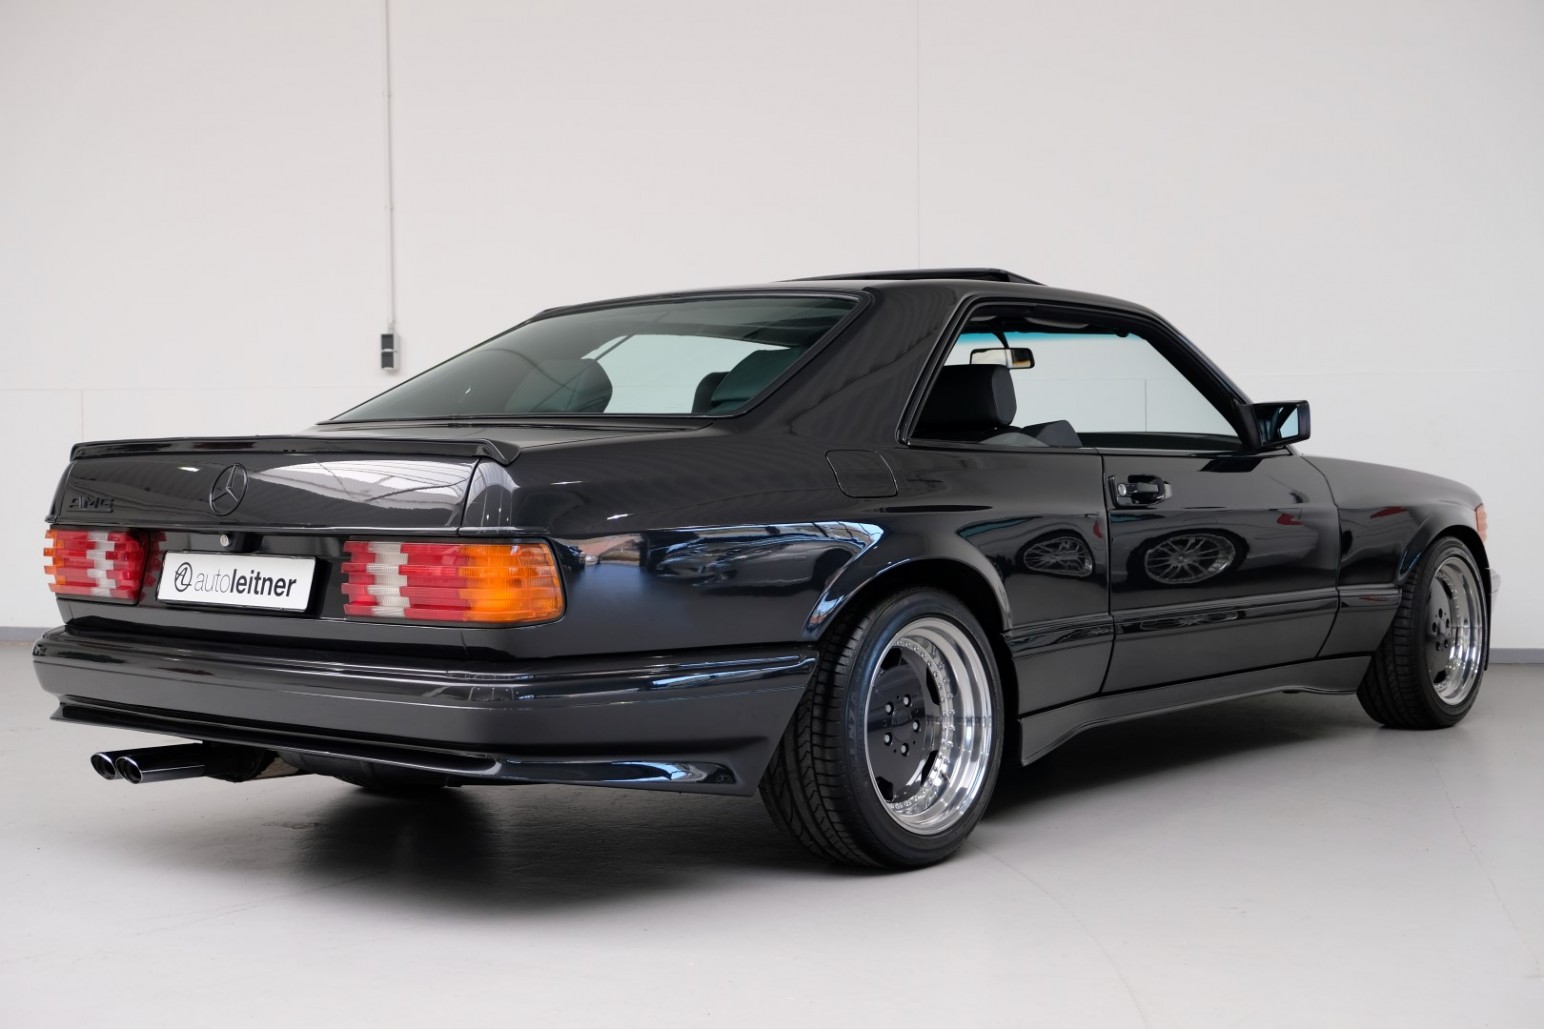 1989 Mercedes 560 SEC AMG 6.0 Widebody Is Intimidating And